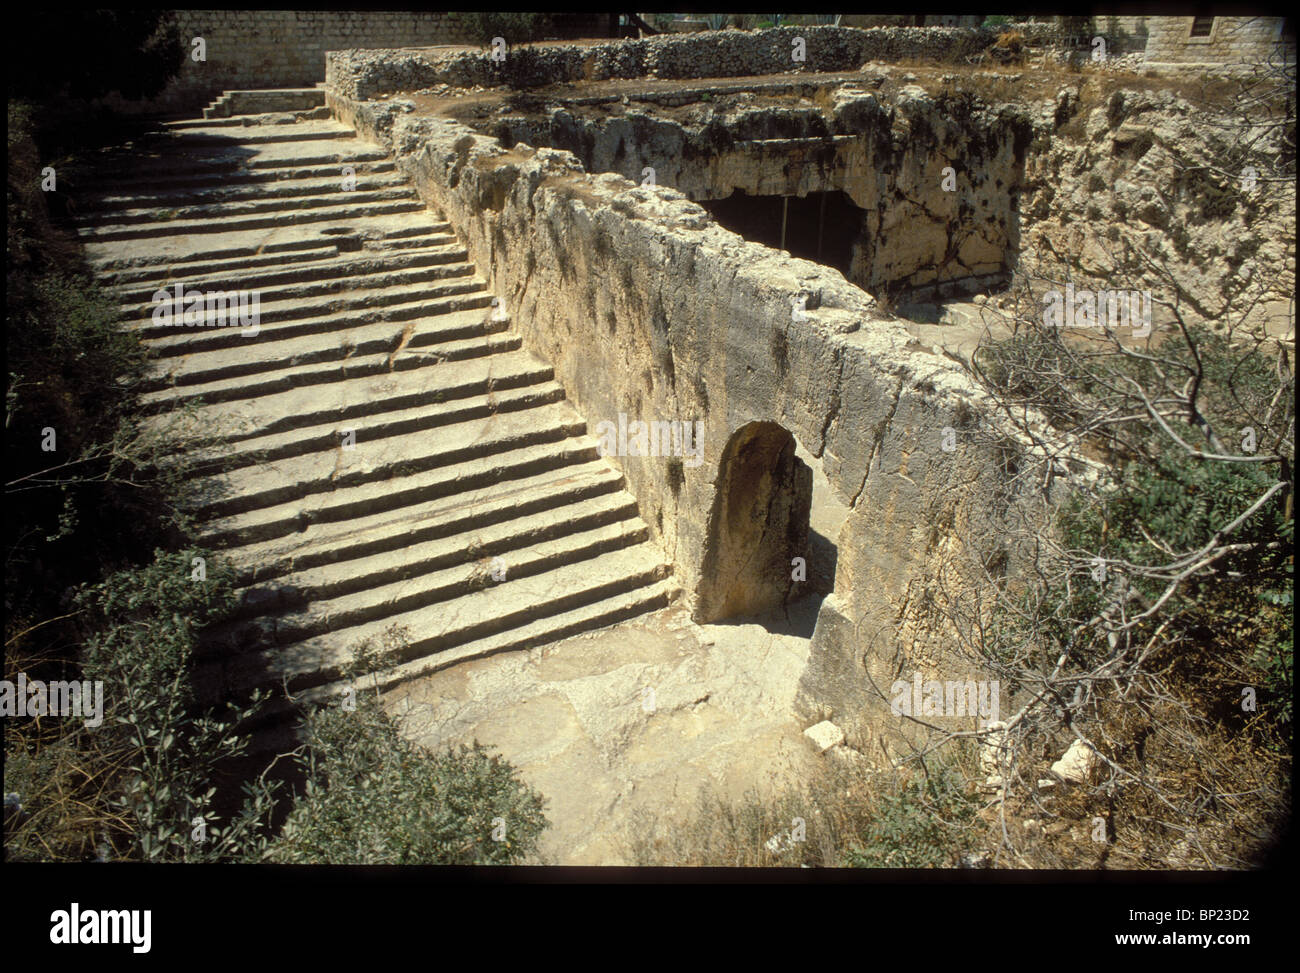 169. TOMBS OF THE KINGS, ROCK HEWN TOMBS IN JERUSALEM BUILT IN THE IST. C. AD. BY QUEEN HELENA. Stock Photo